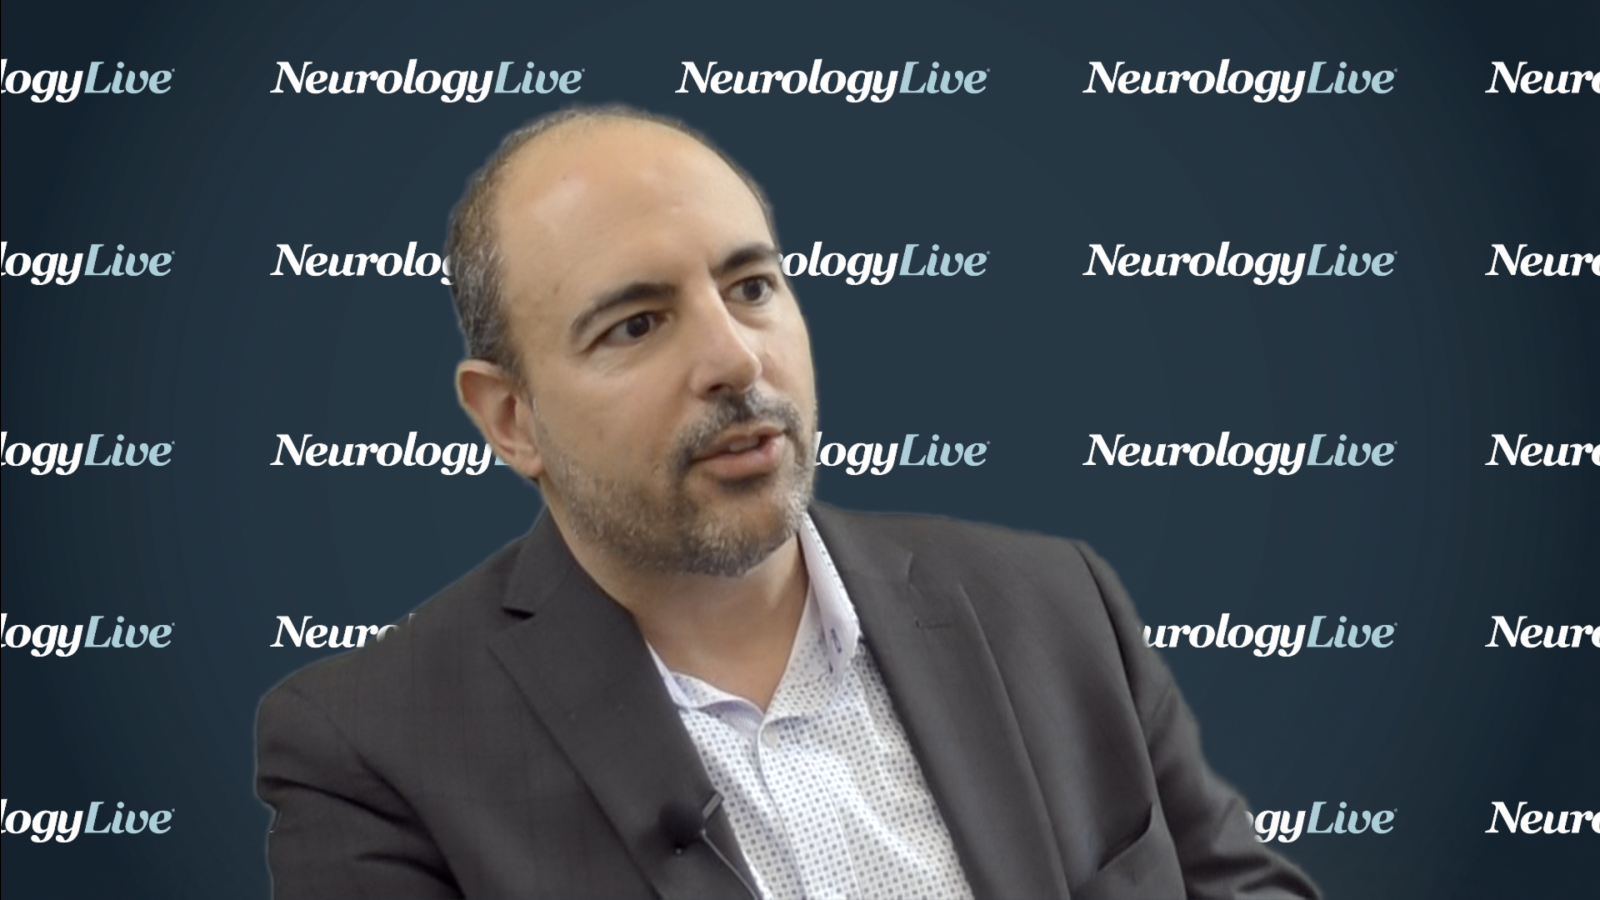 Anthony Fiorino, MD, PhD: Using nVNS in Various Migraine Populations